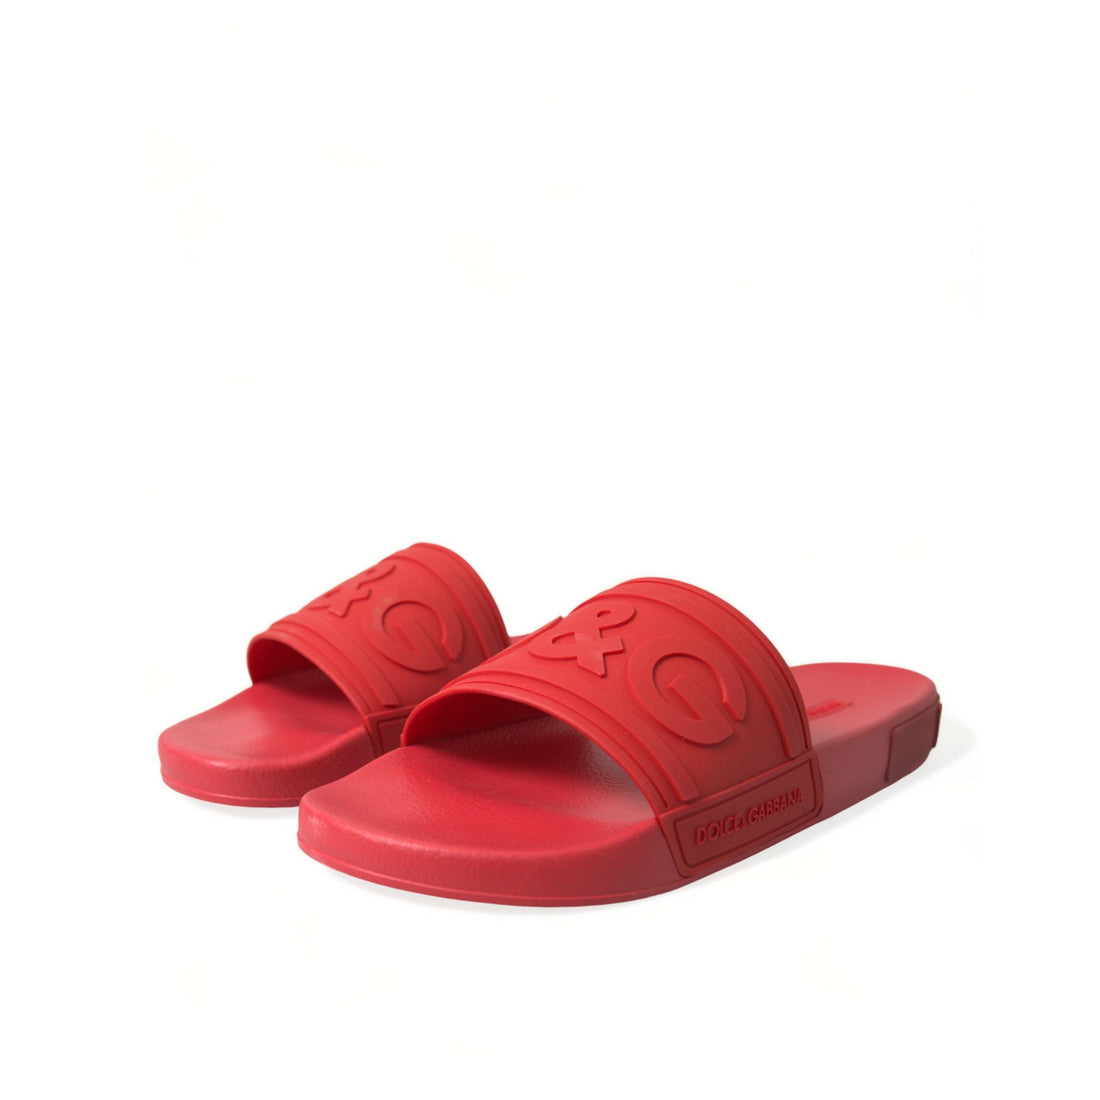 Dolce & Gabbana Red Rubber Sandals Slippers Beachwear Shoes